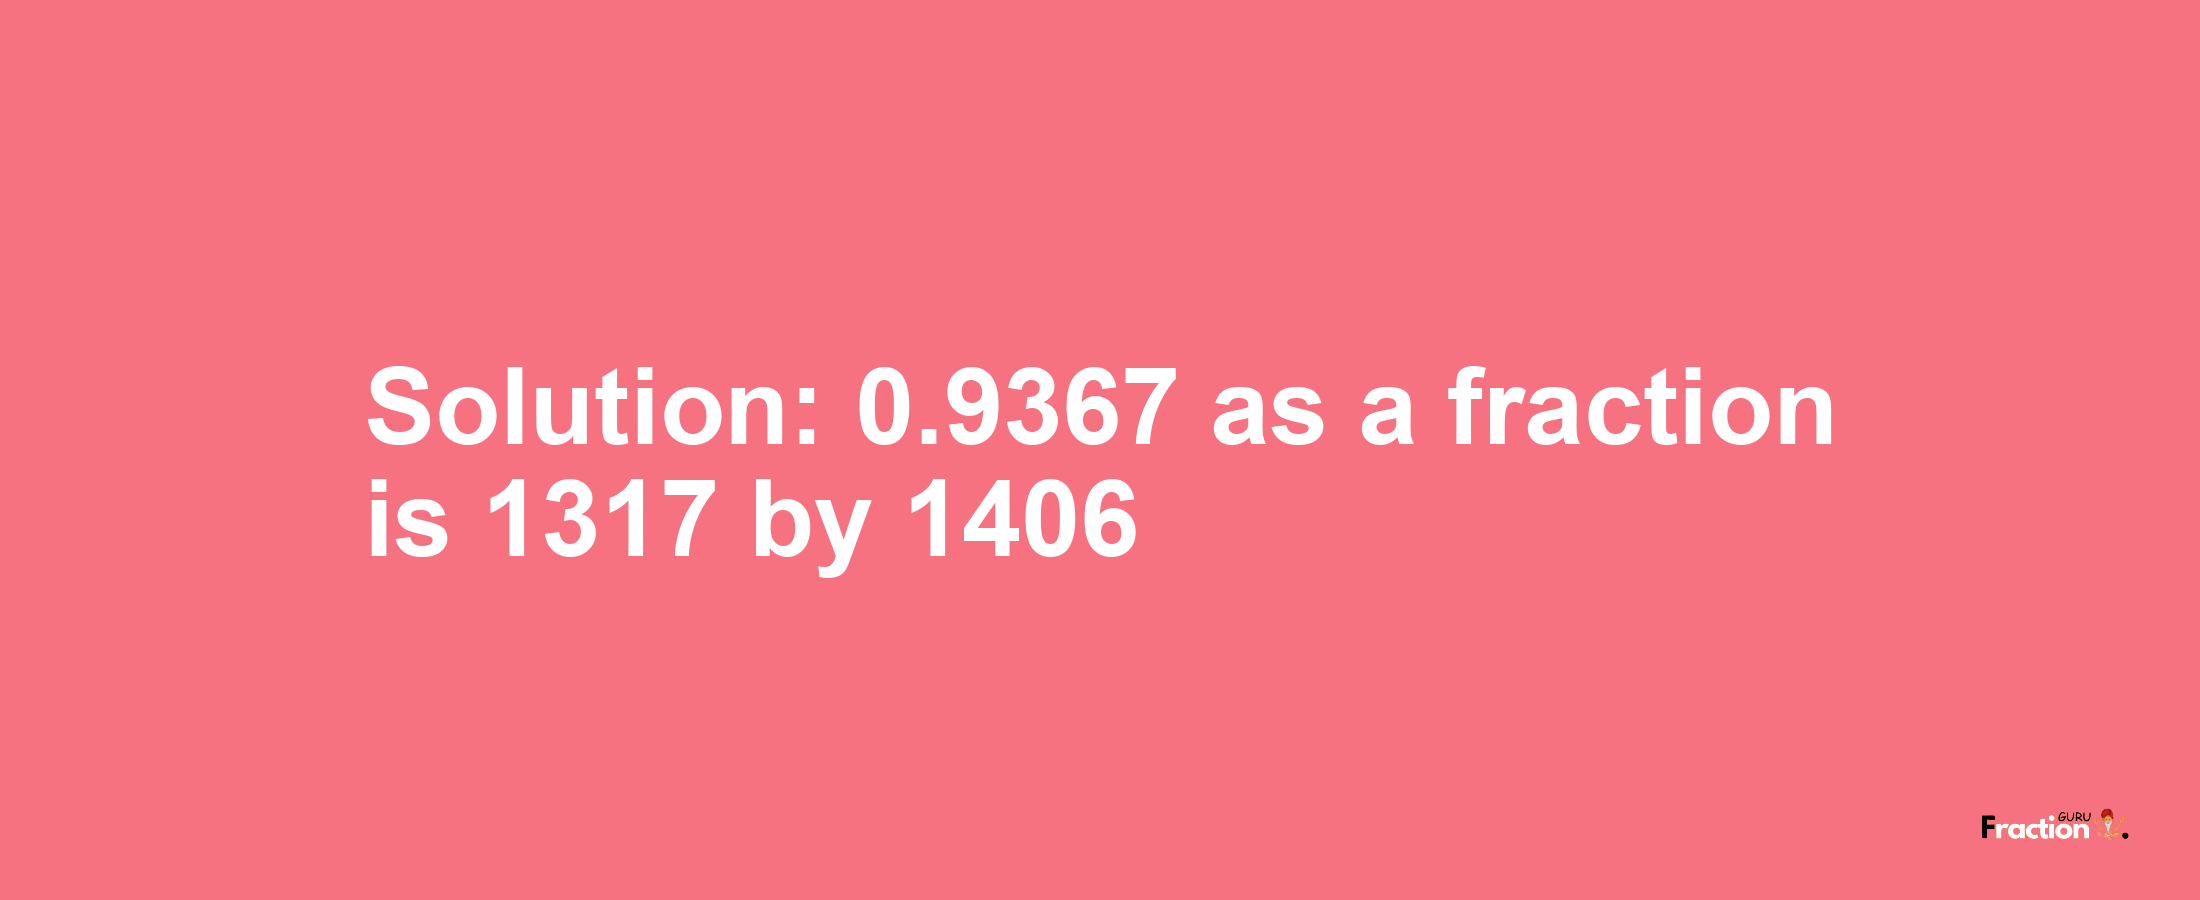 Solution:0.9367 as a fraction is 1317/1406